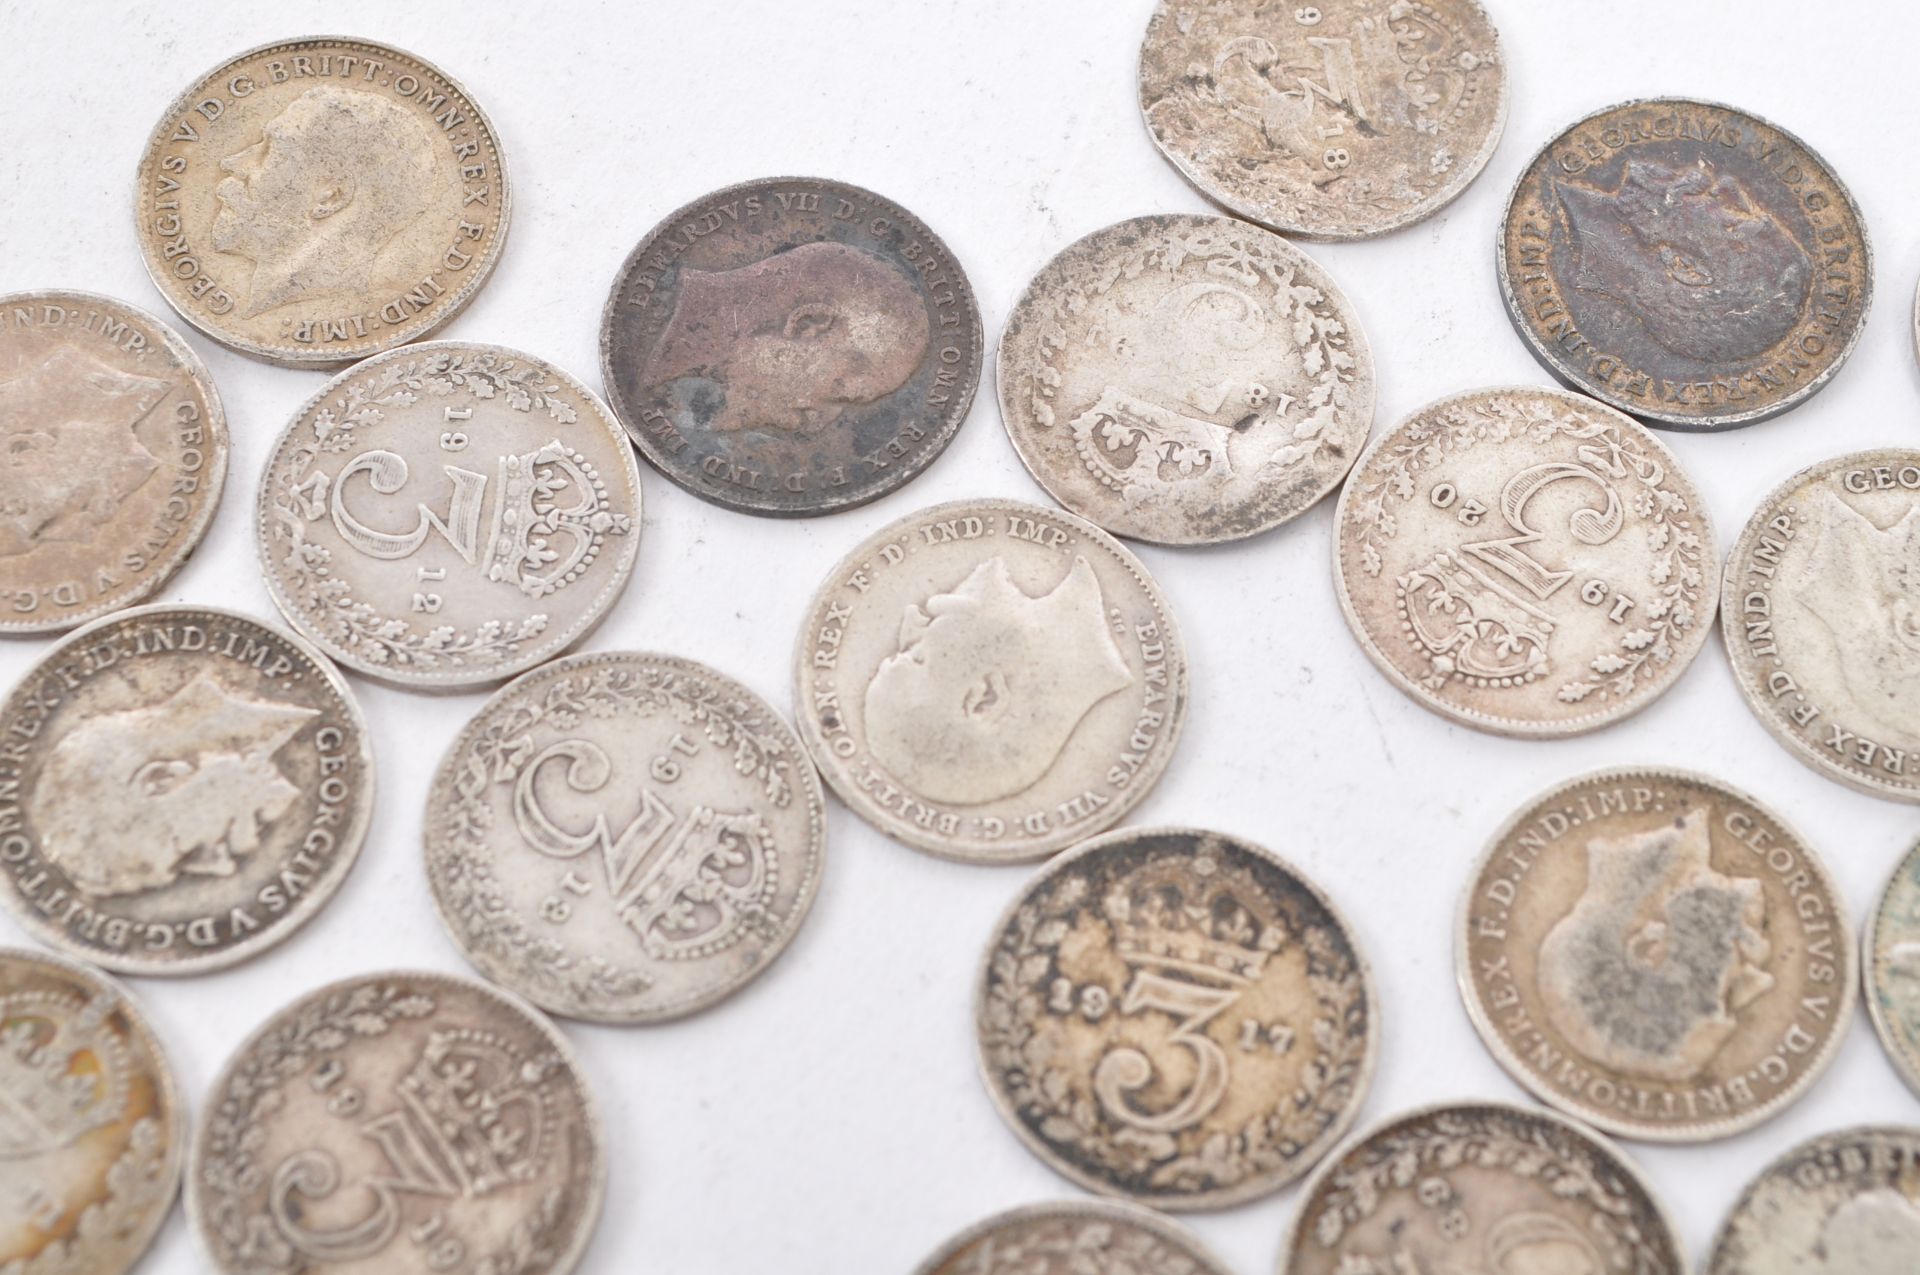 COLLECTION OF 19TH AND 20TH CENTURY SILVER THREE PENCE COINS - Image 5 of 8